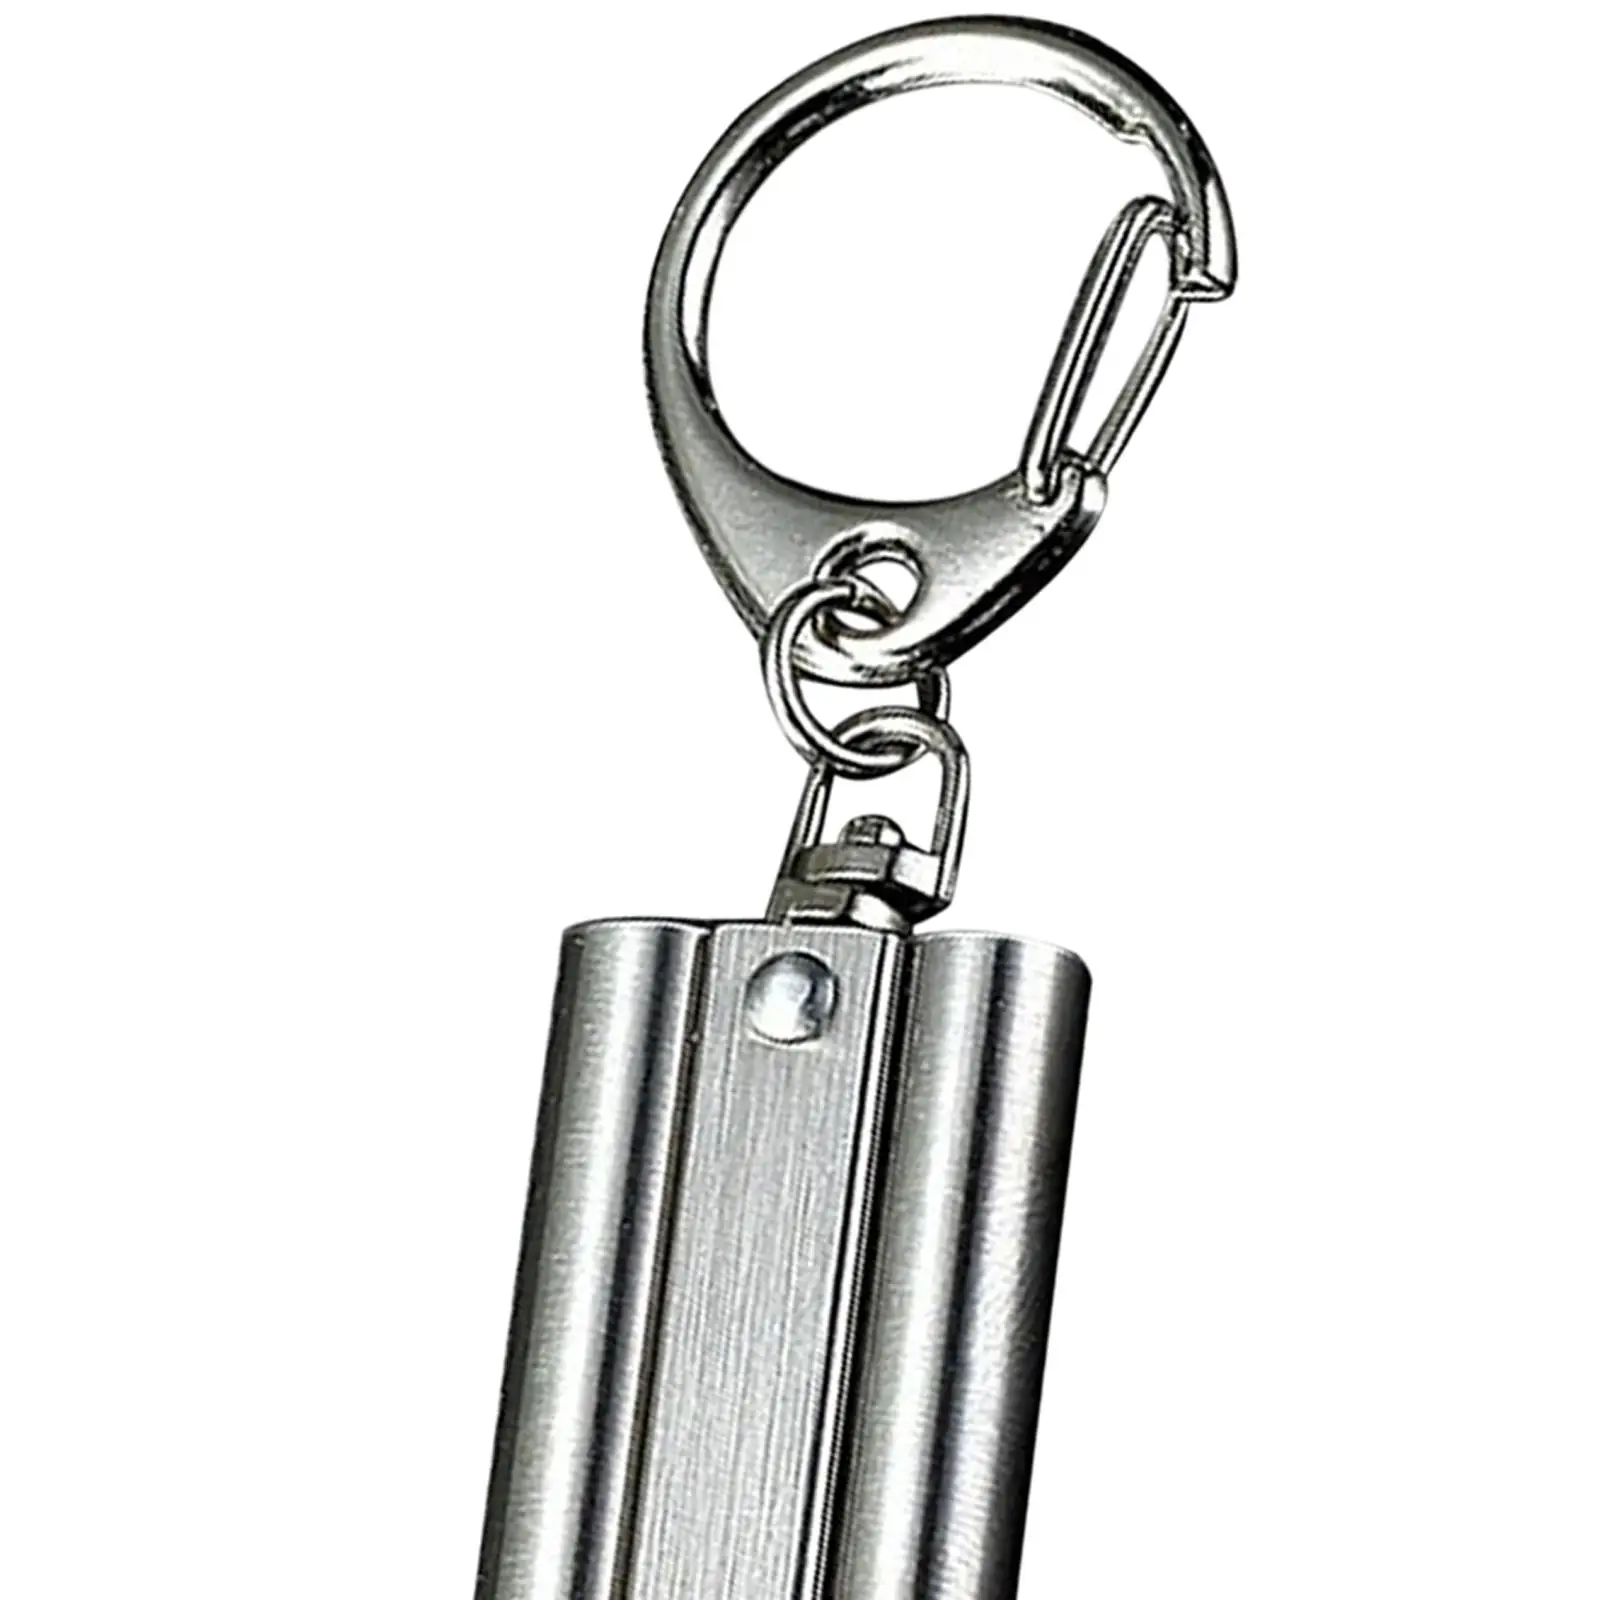 Lifeguard Safety Whistle Referees Whistle Compact Stainless Steel Survival Whistle for Fishing Training Camping Kayak Traveling